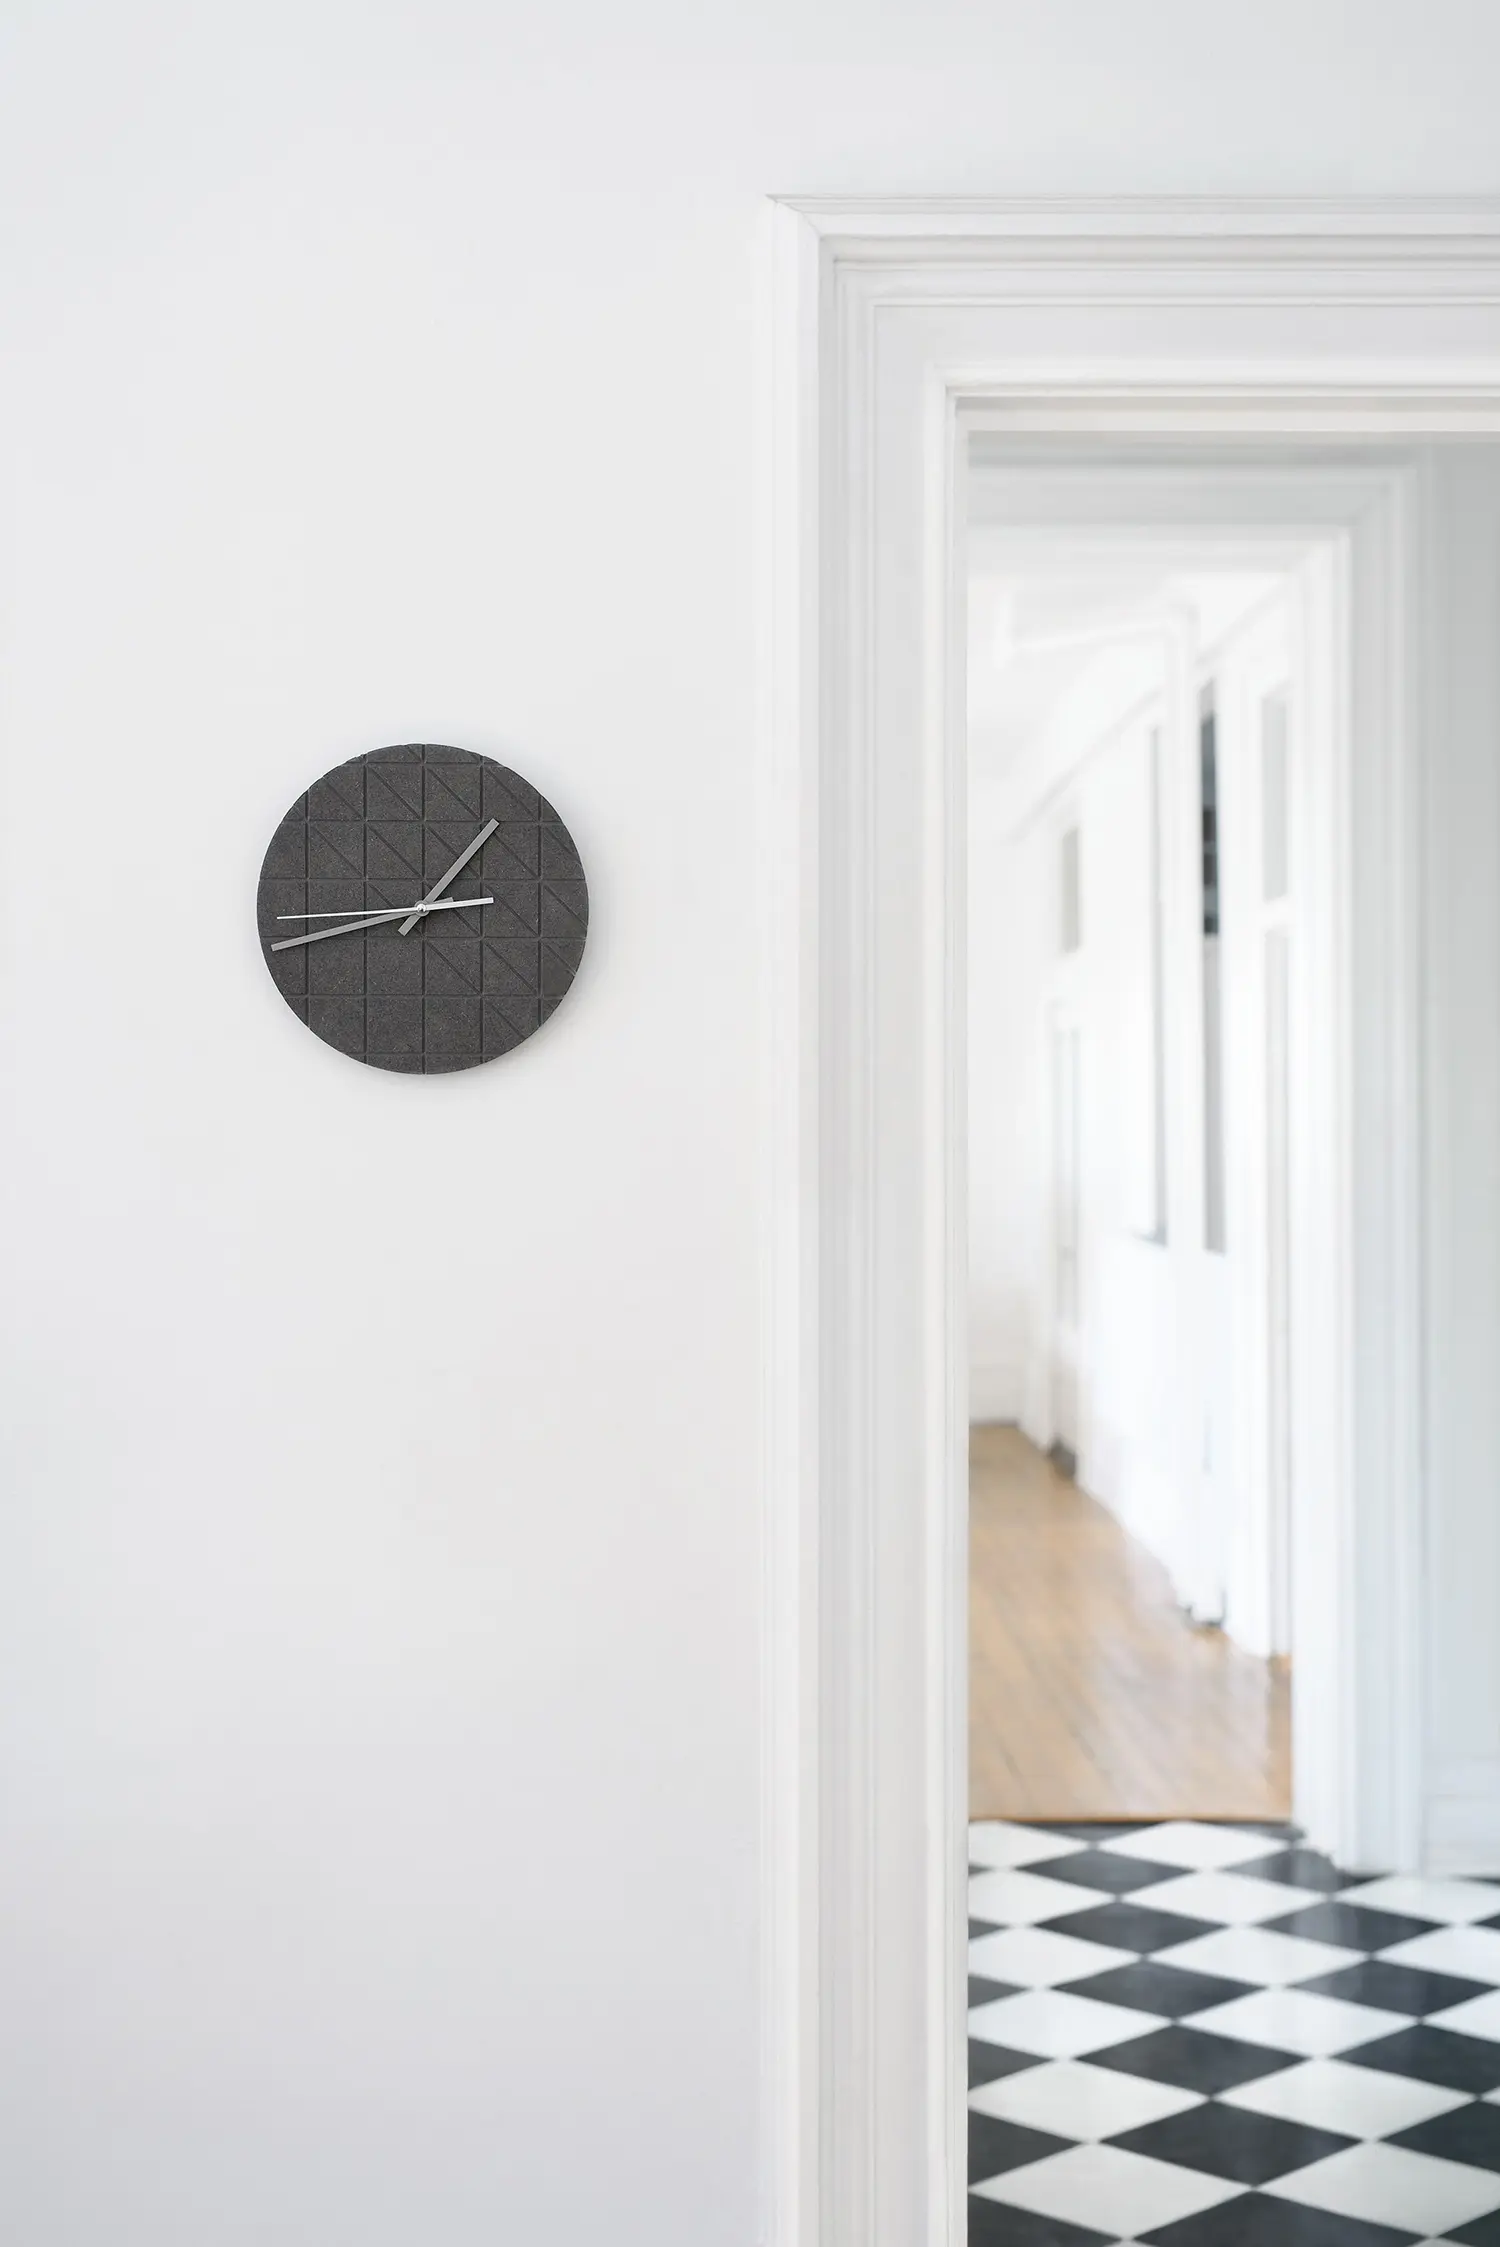 Gray wall clock hanging on a white wall